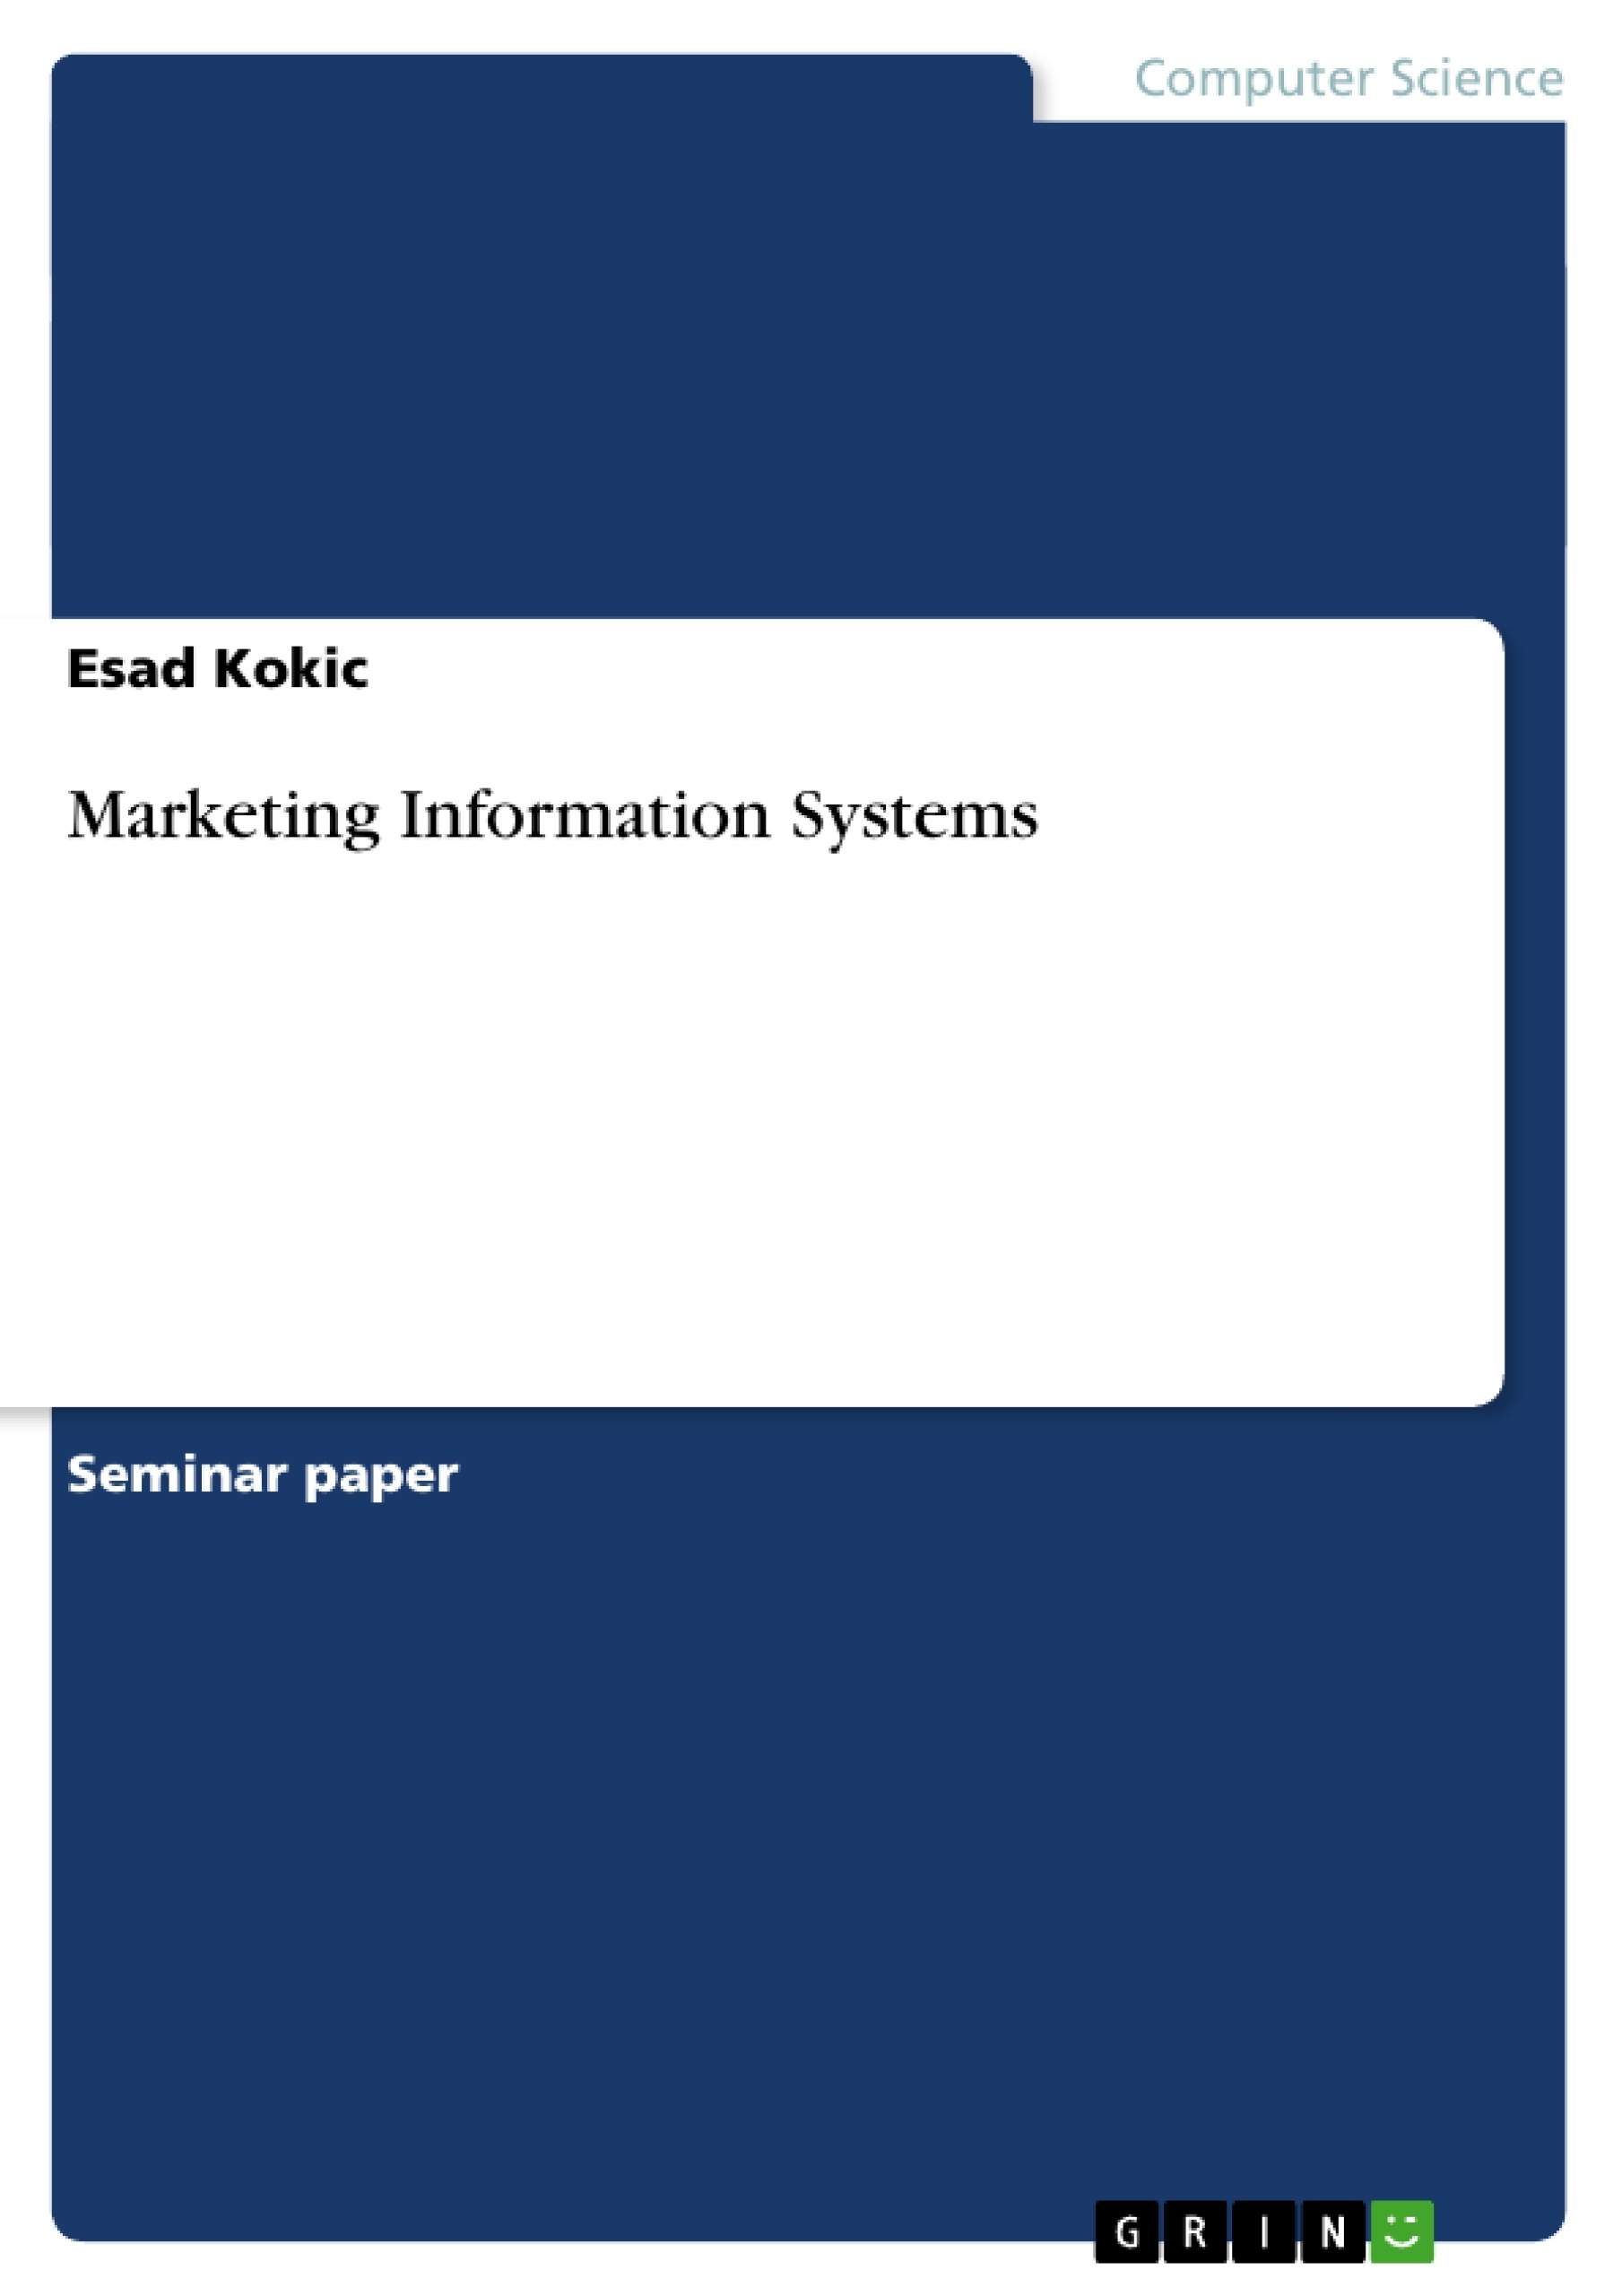 Title: Marketing Information Systems